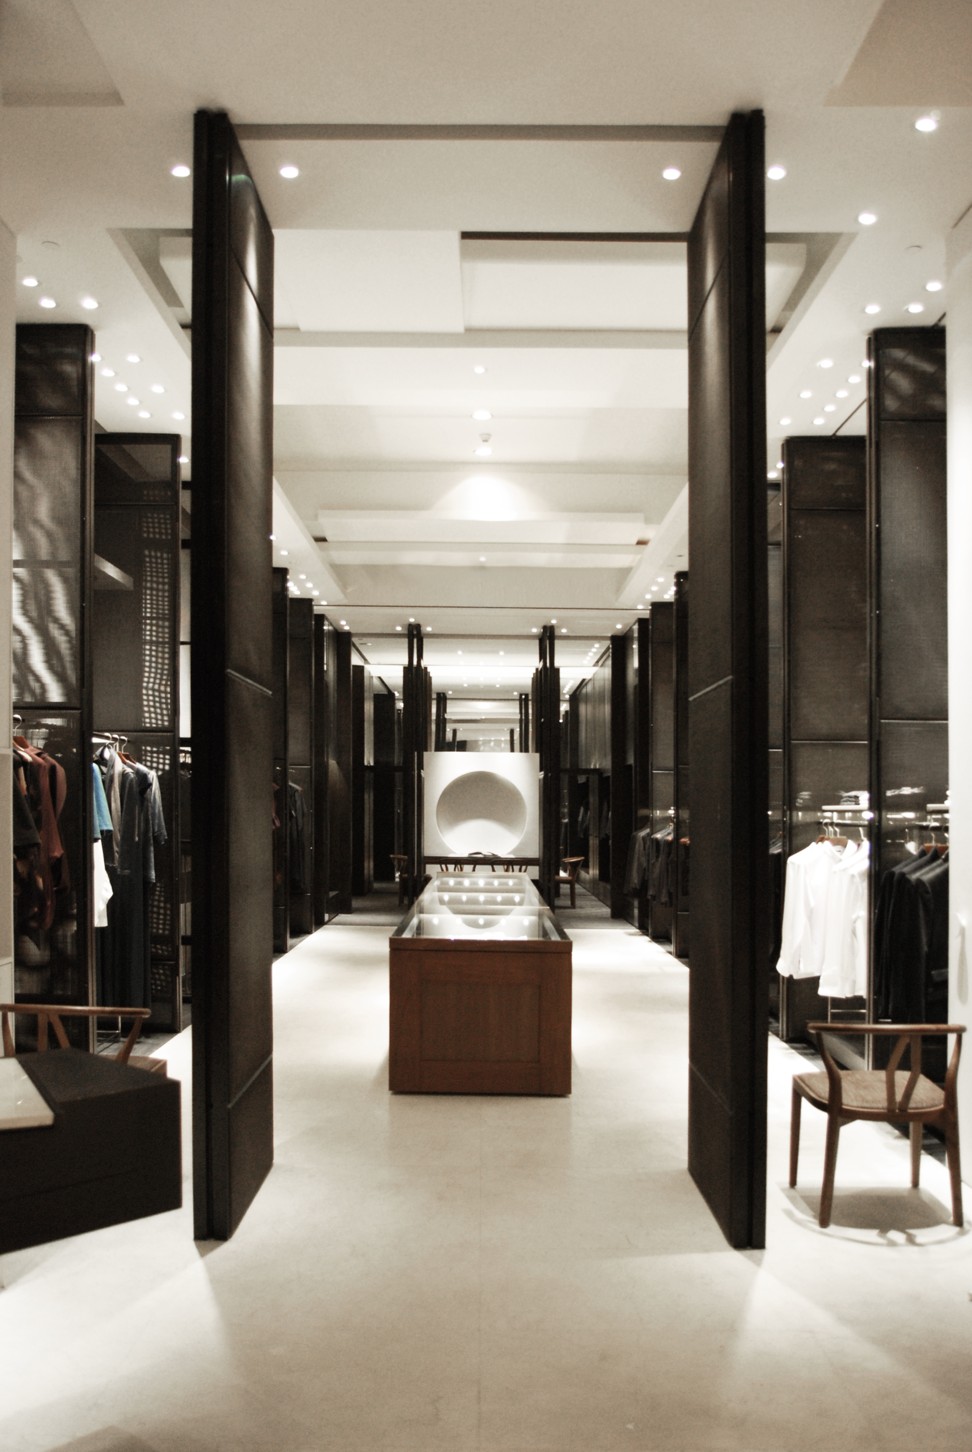 The interior of the Blanc de Chine store in Beijing, designed by LI&Co..